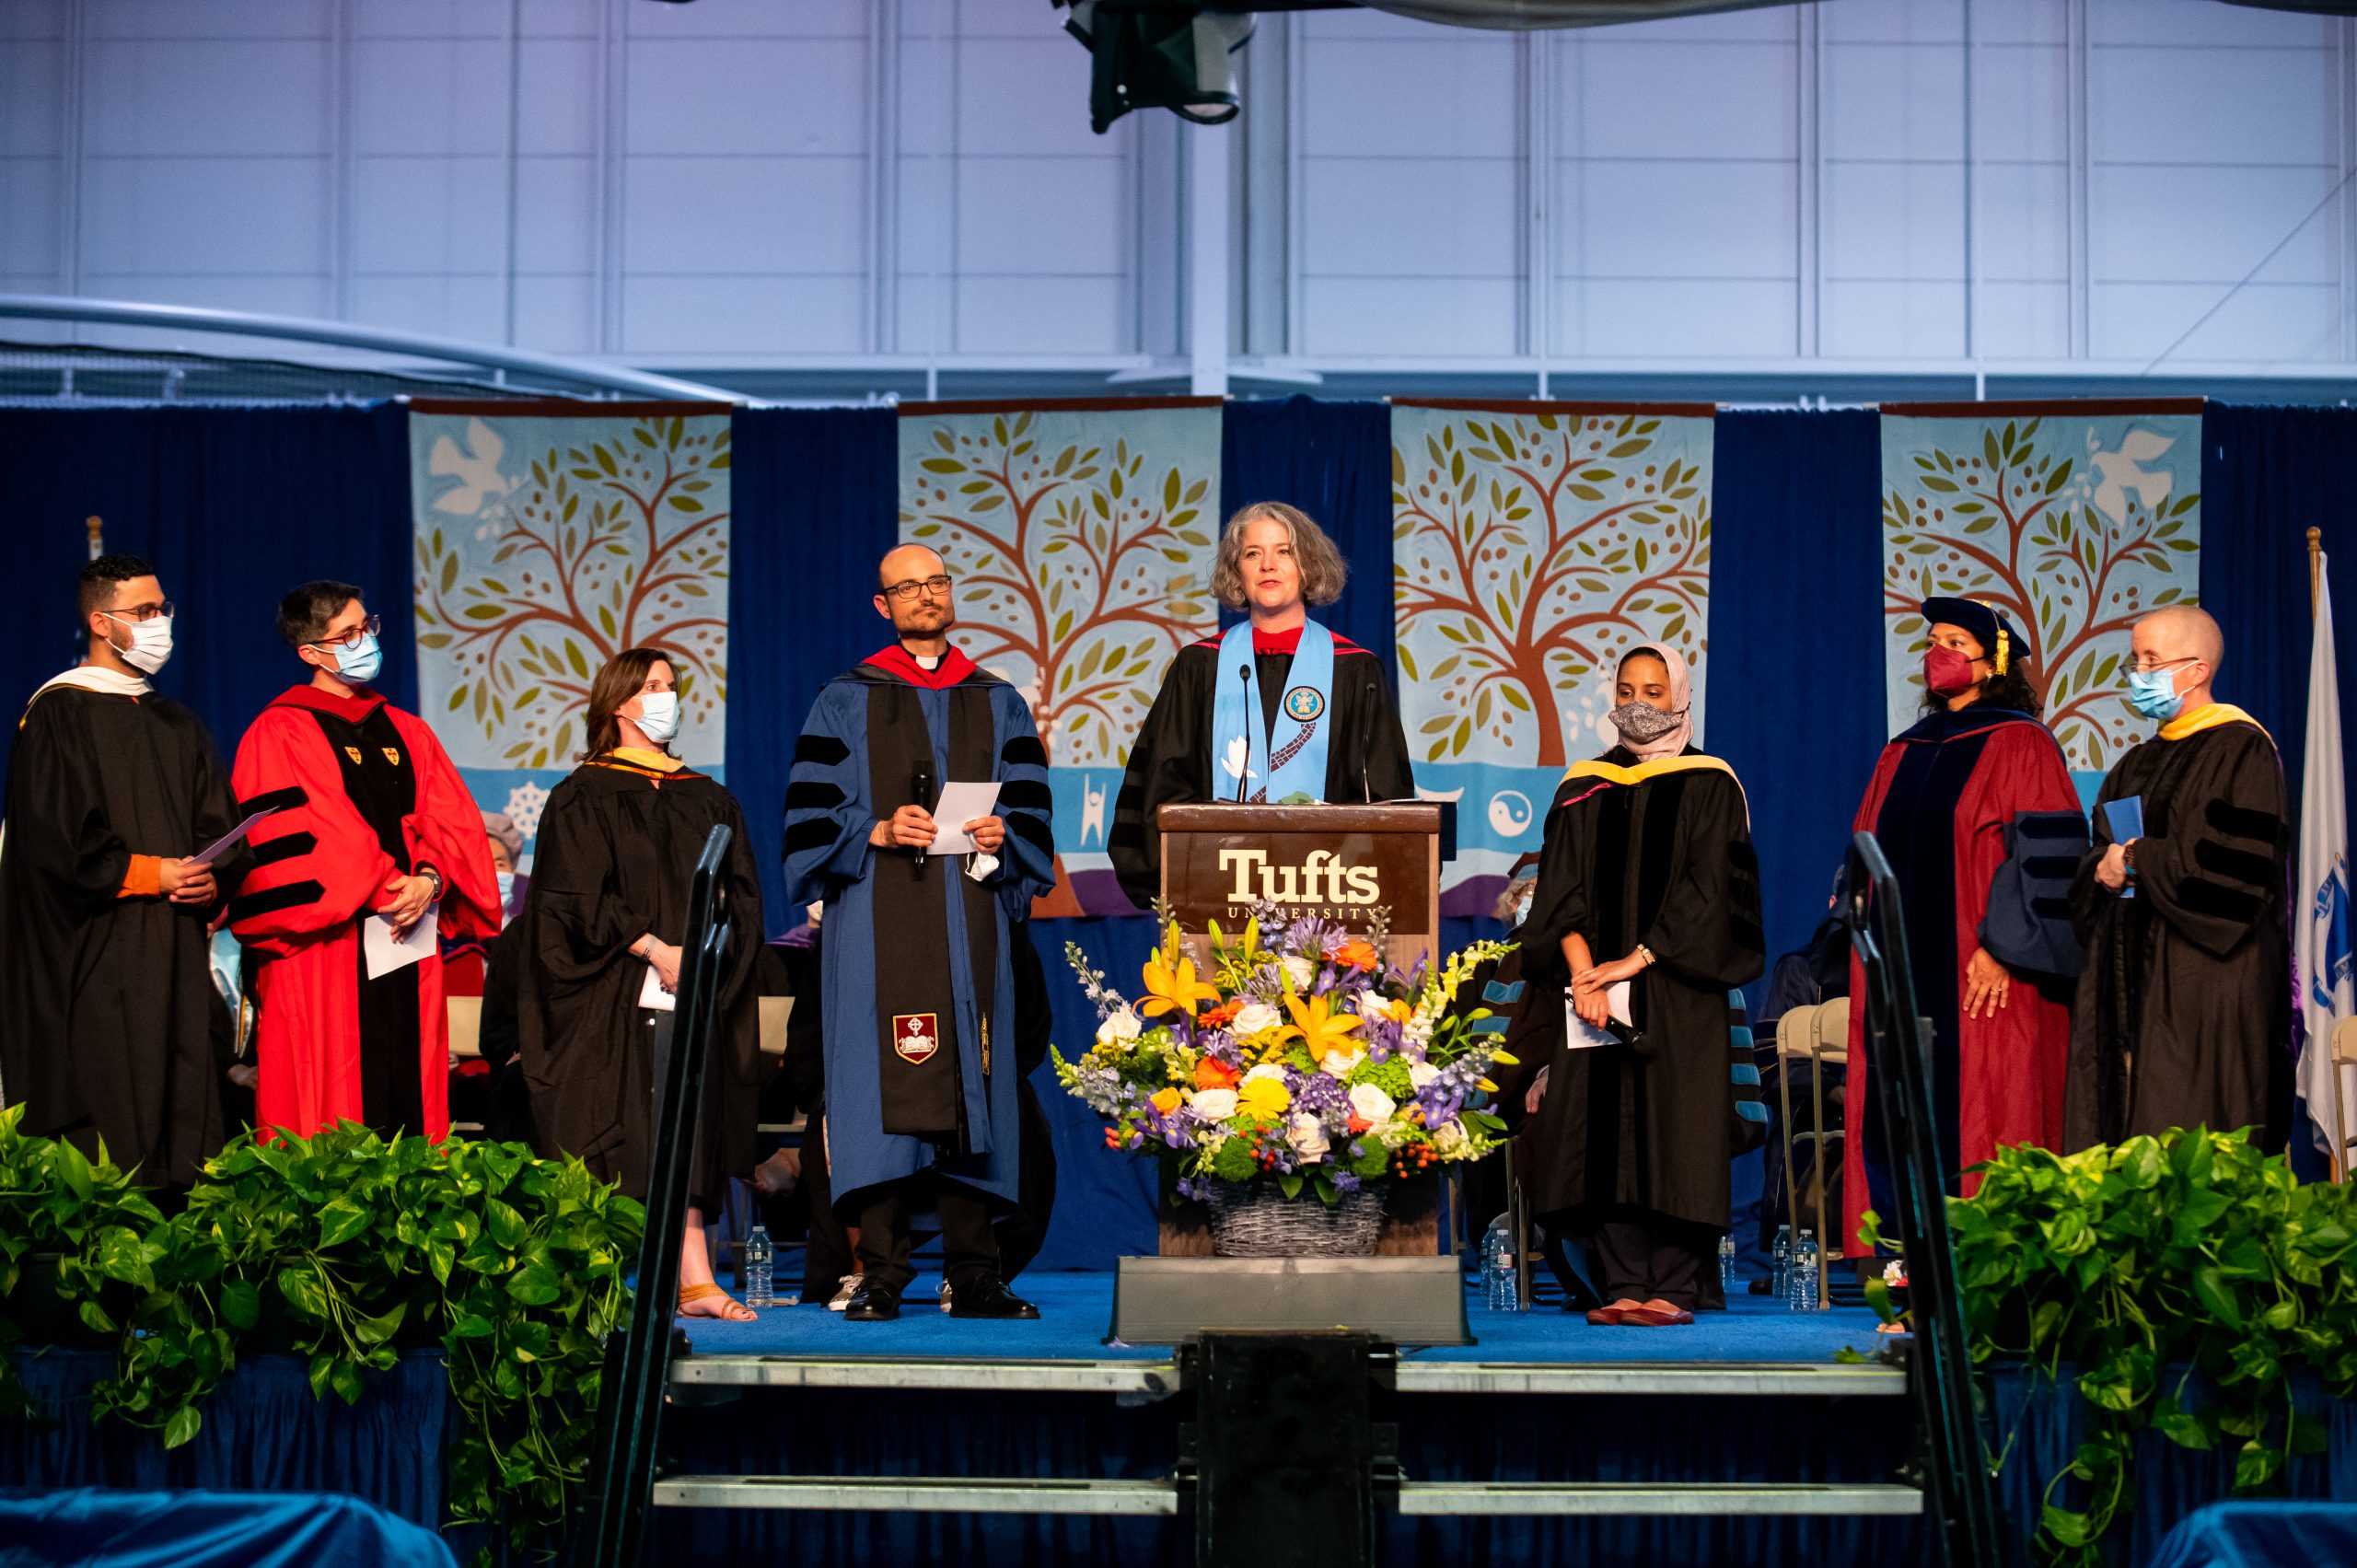 People on a stage in academic regalia